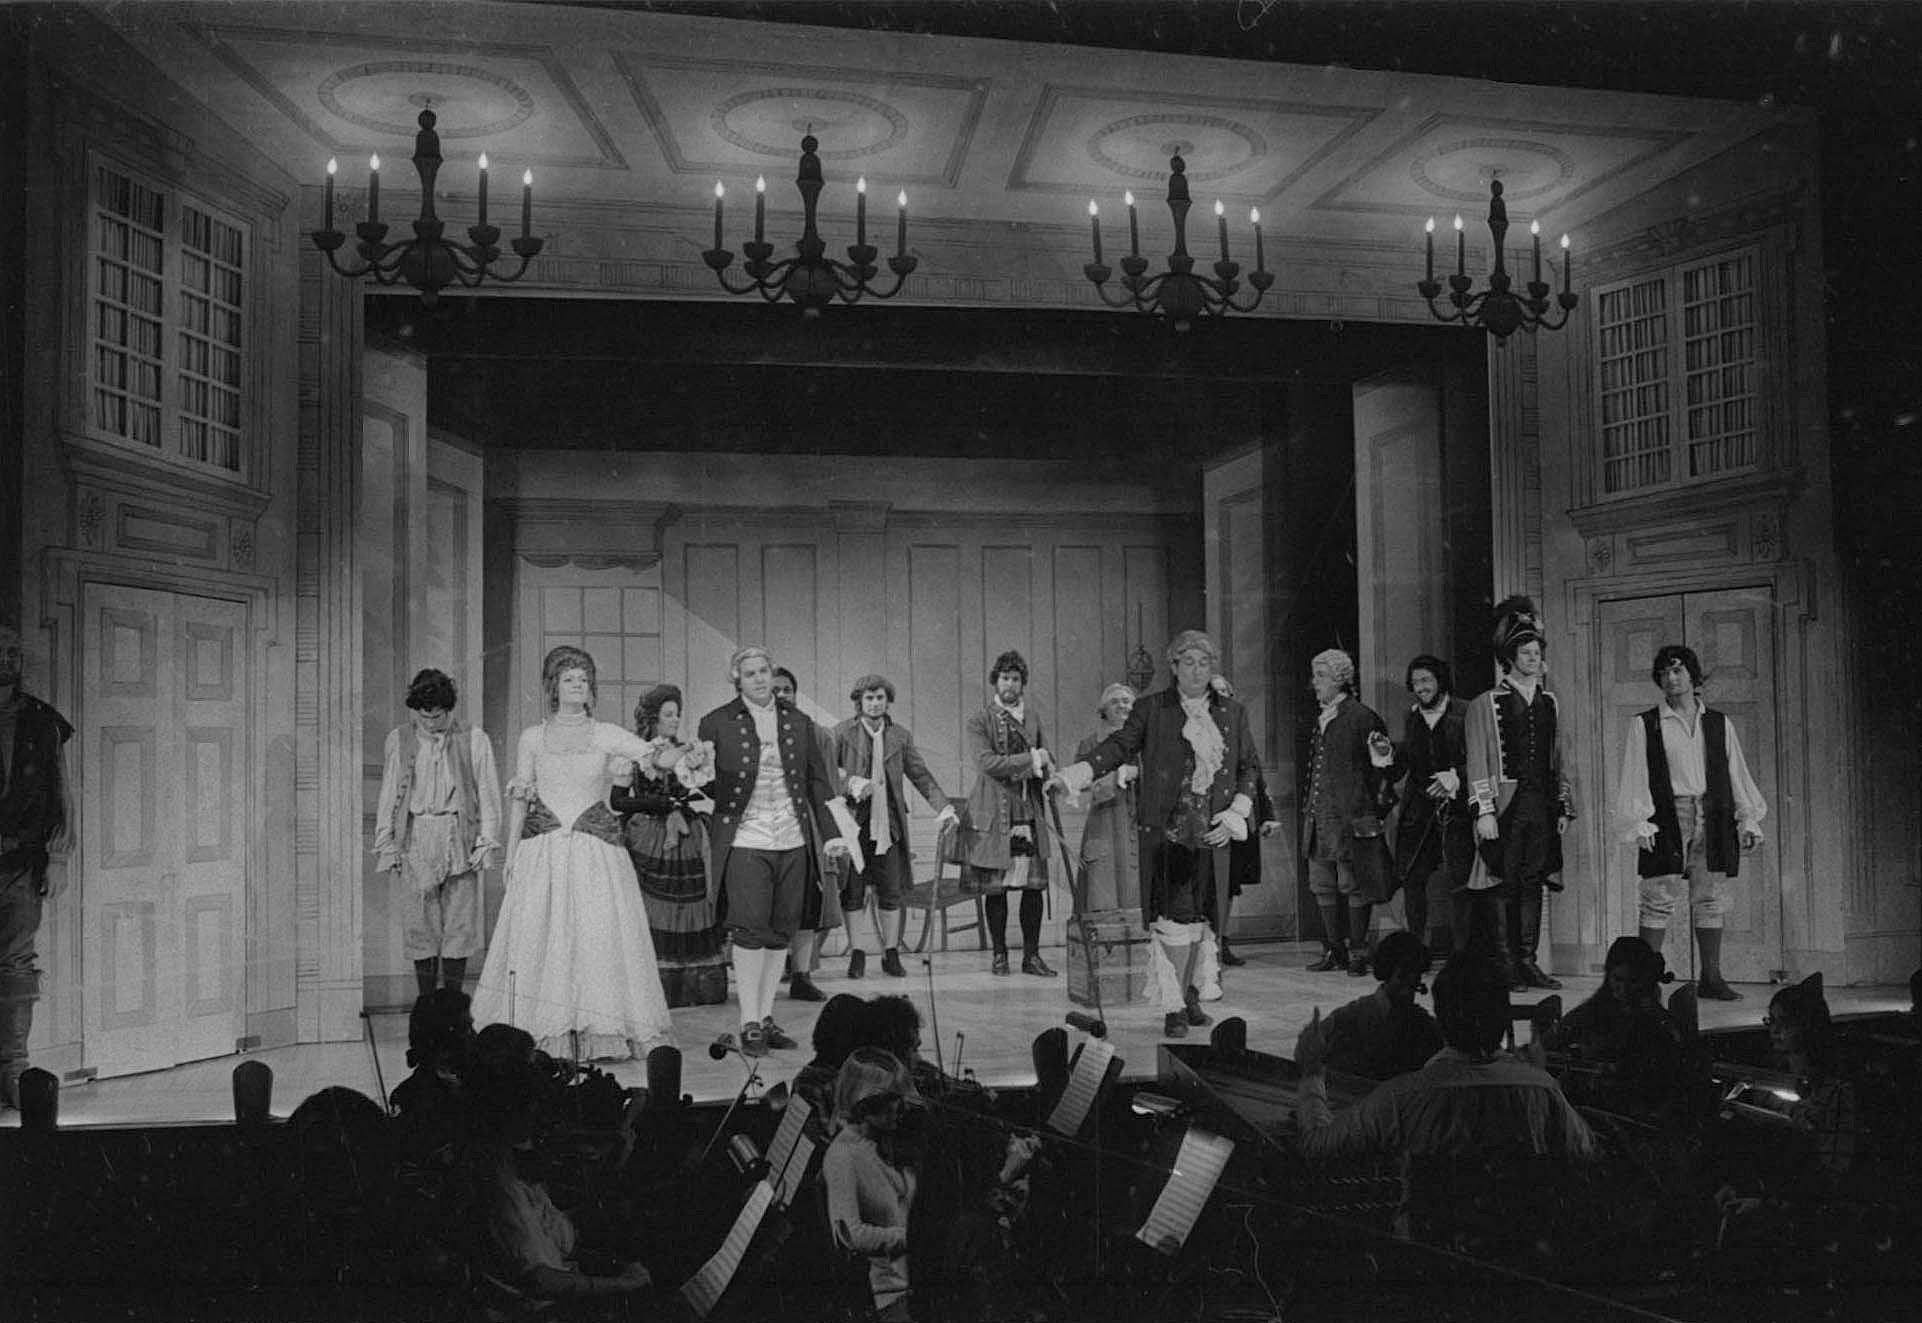 The cast taking bows in Kilbourn Hall. P